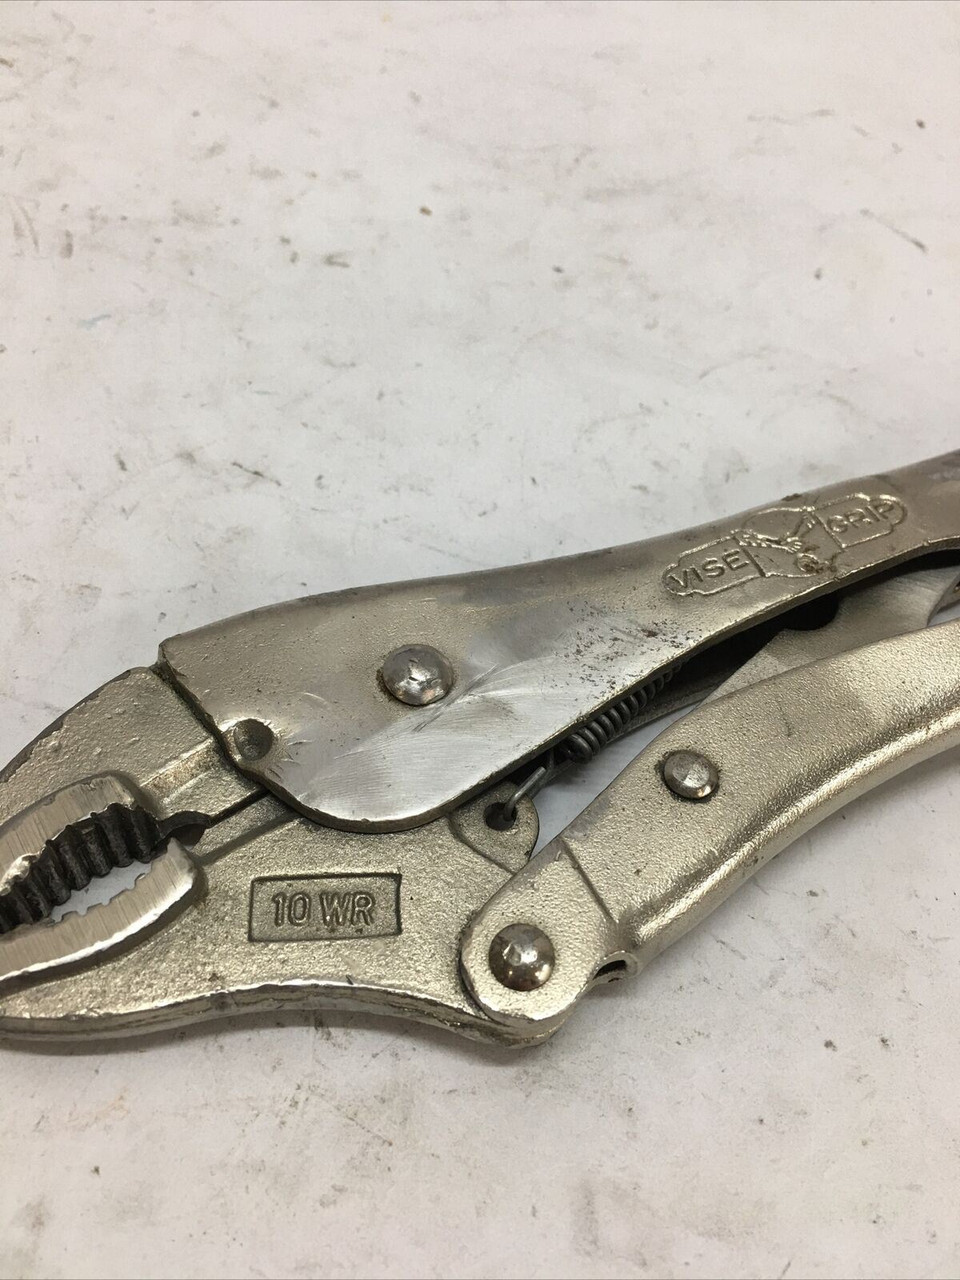 Vintage Sheers Plyers Pliers with Curl Handle 6.75 long